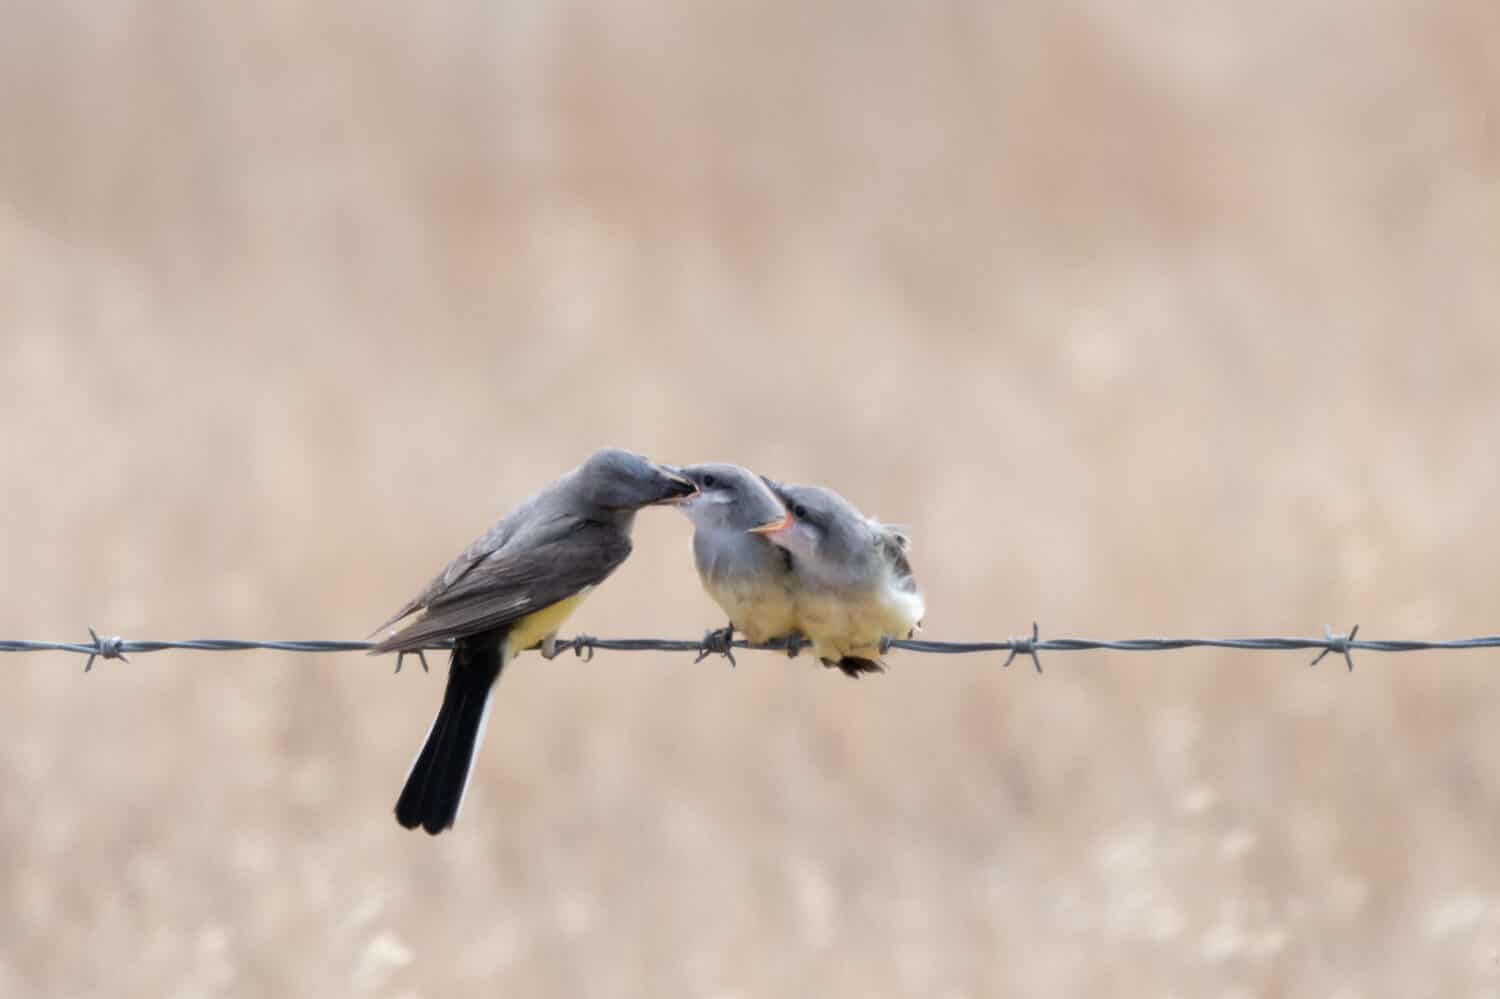 An adult Western Kingbird feeding one of two fledglings (beak inserted) while the other fledgling demands food with beak wide open.  Isolated against a blurred background.